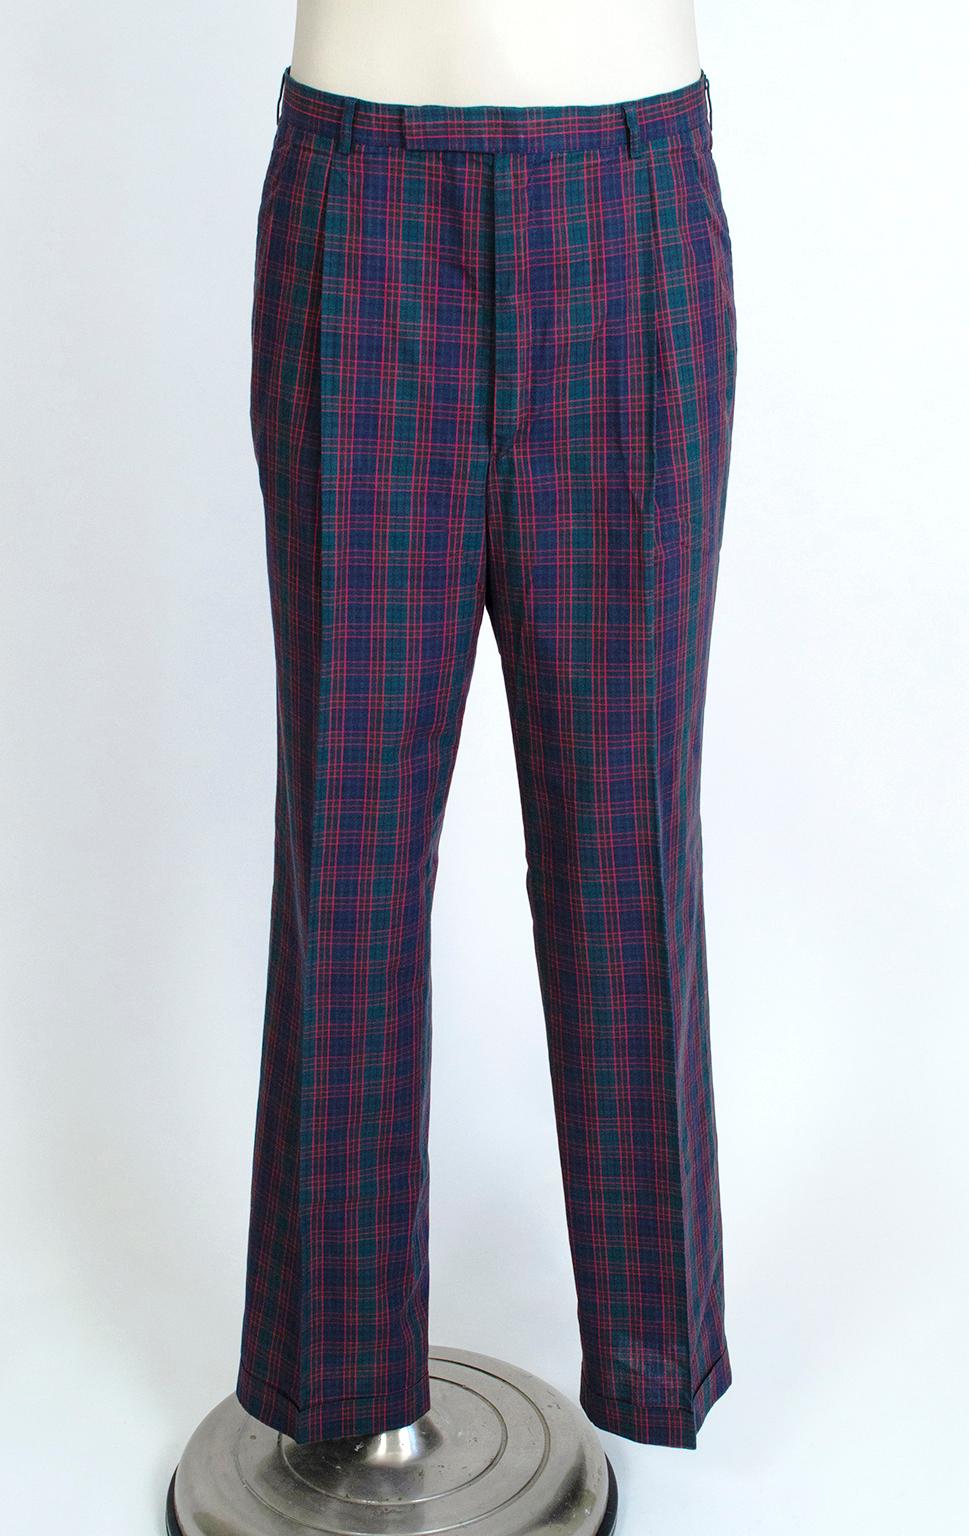 As suitable for 18 holes at St Andrews as Christmas with the inlaws, these incredible trousers will take you through the year with Scottish flair; perfect for pairing with a cardigan or turtleneck. Also available in Macintosh tartan under separate